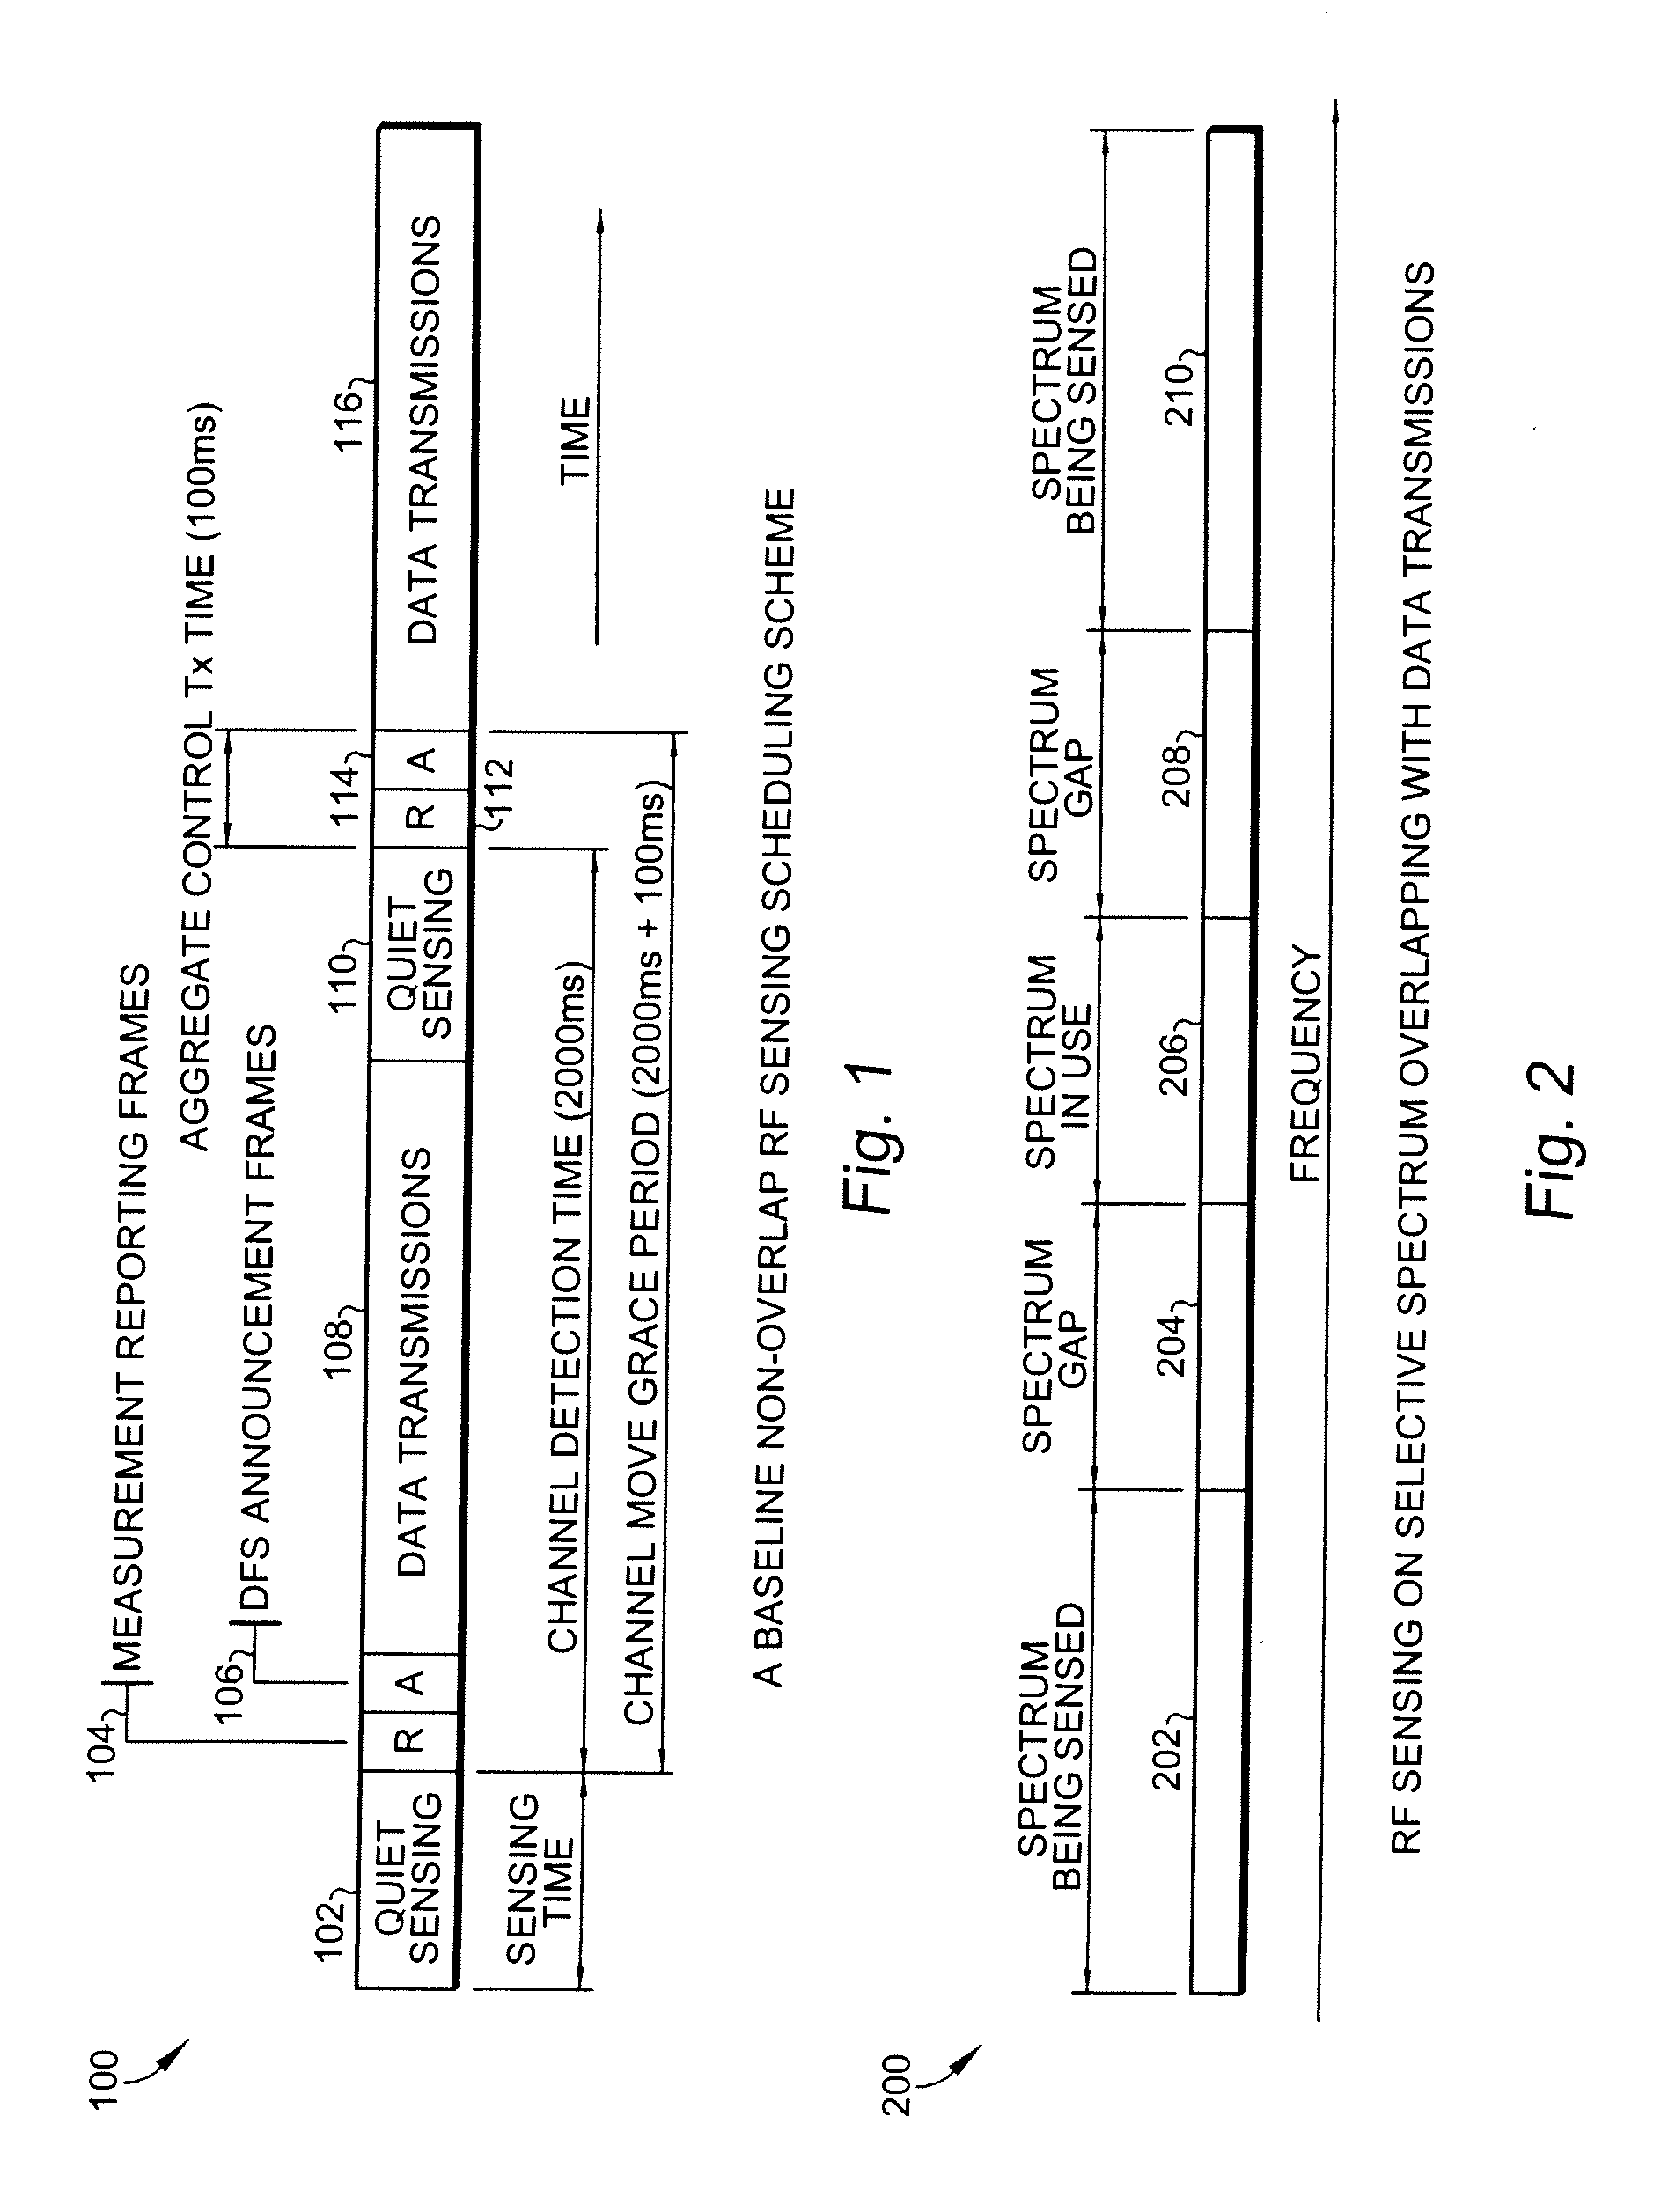 Method of inter-system coexistence and spectrum sharing for dynamic spectrum access networks-on-demand spectrum contention